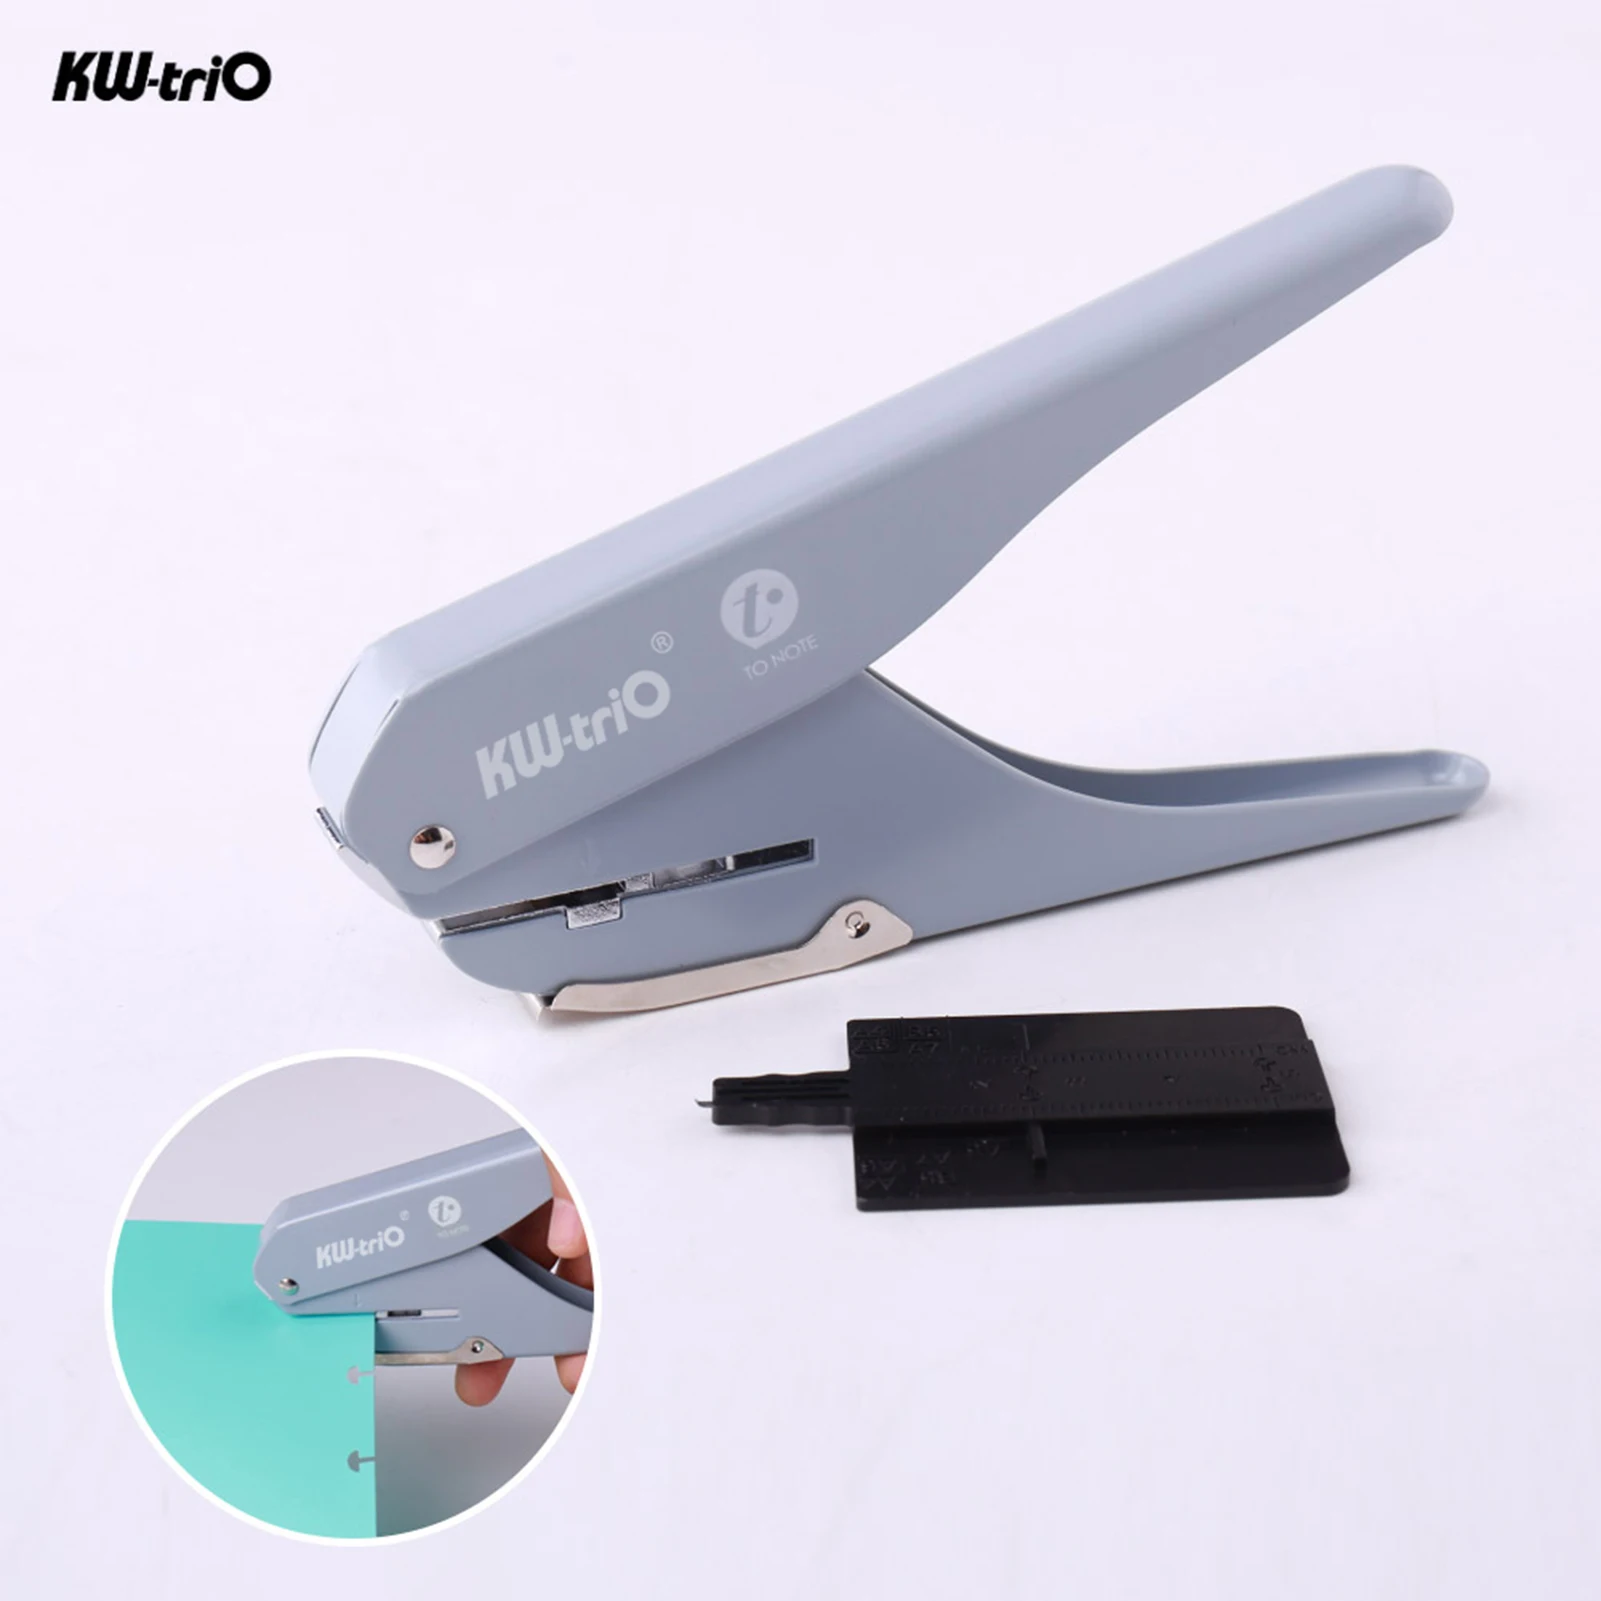 

KW-trio Handheld DIY Mushroom Single Hole Punch Puncher Paper Cutter with Ruler for Office Home School Students